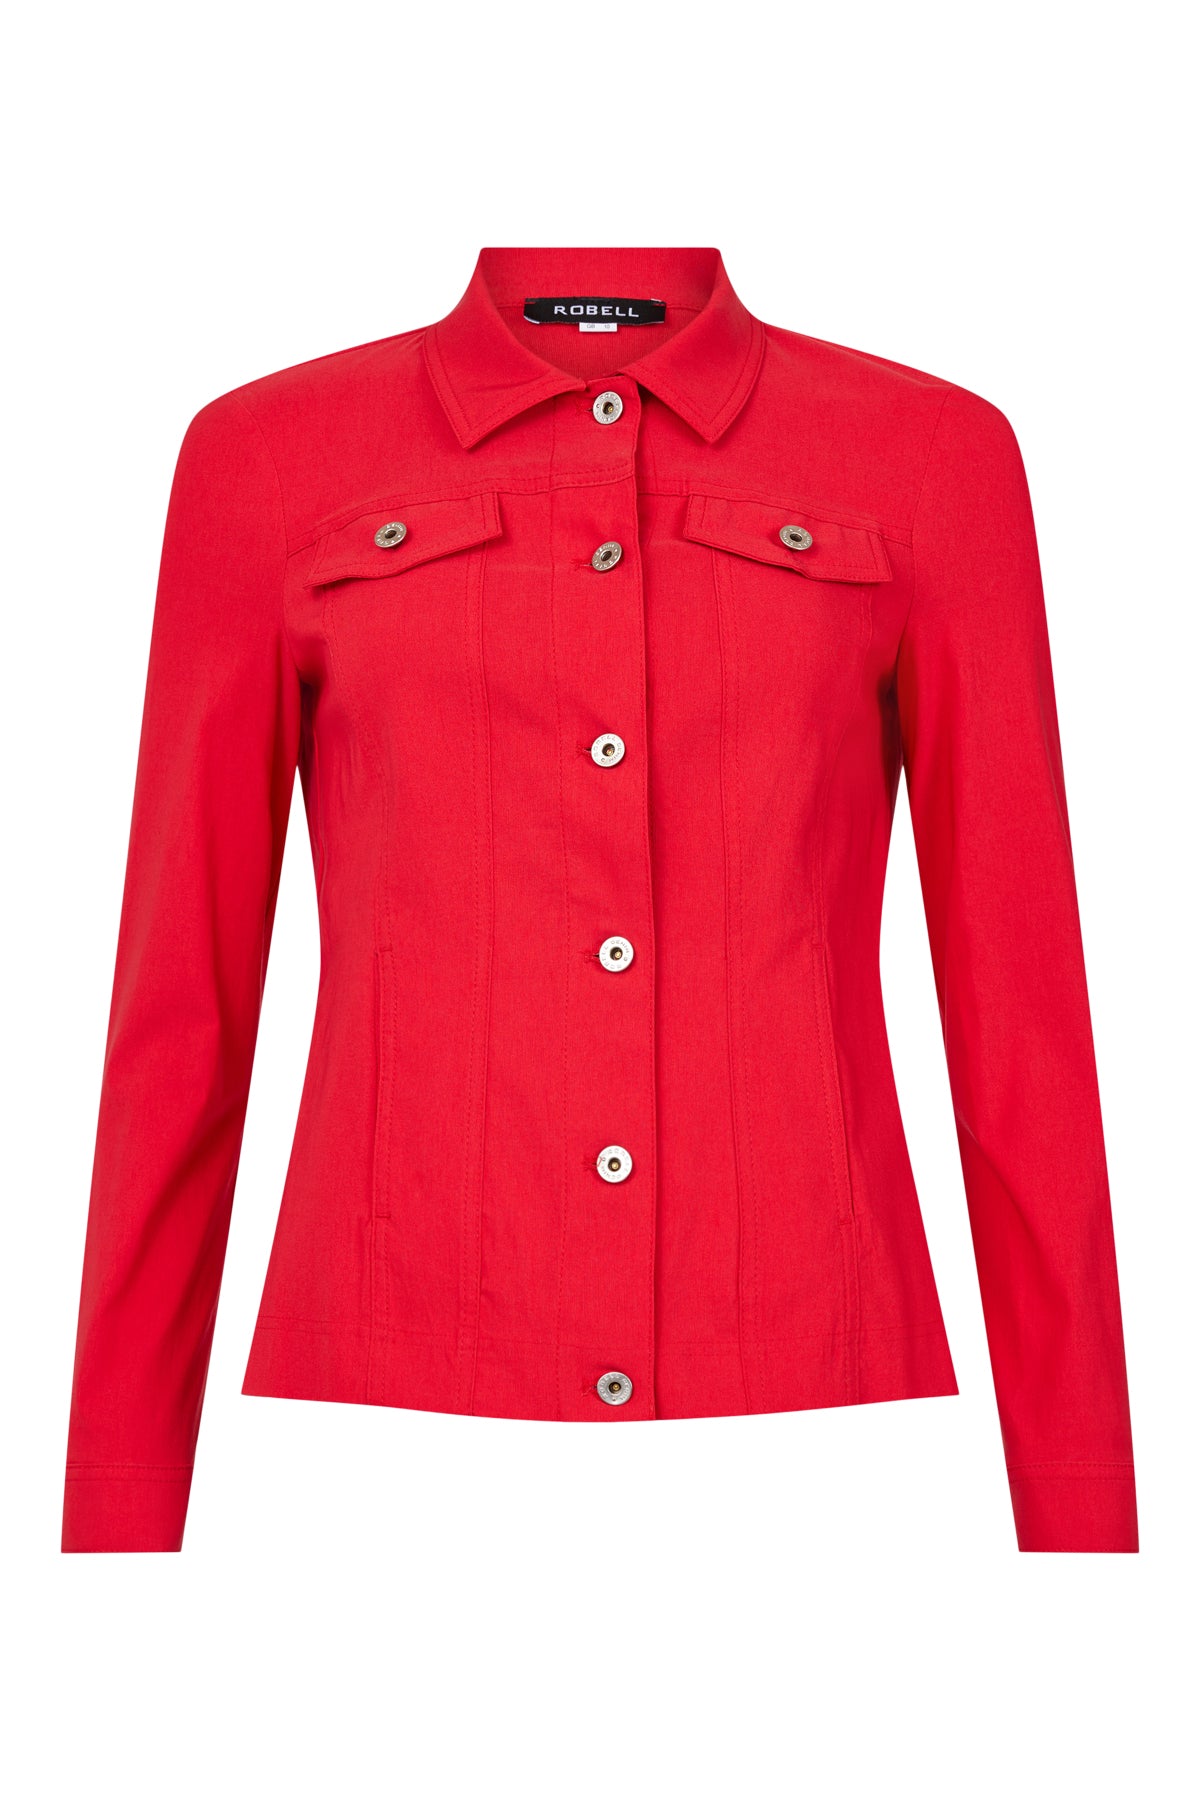 Robell Happy Jacket Red54709 40